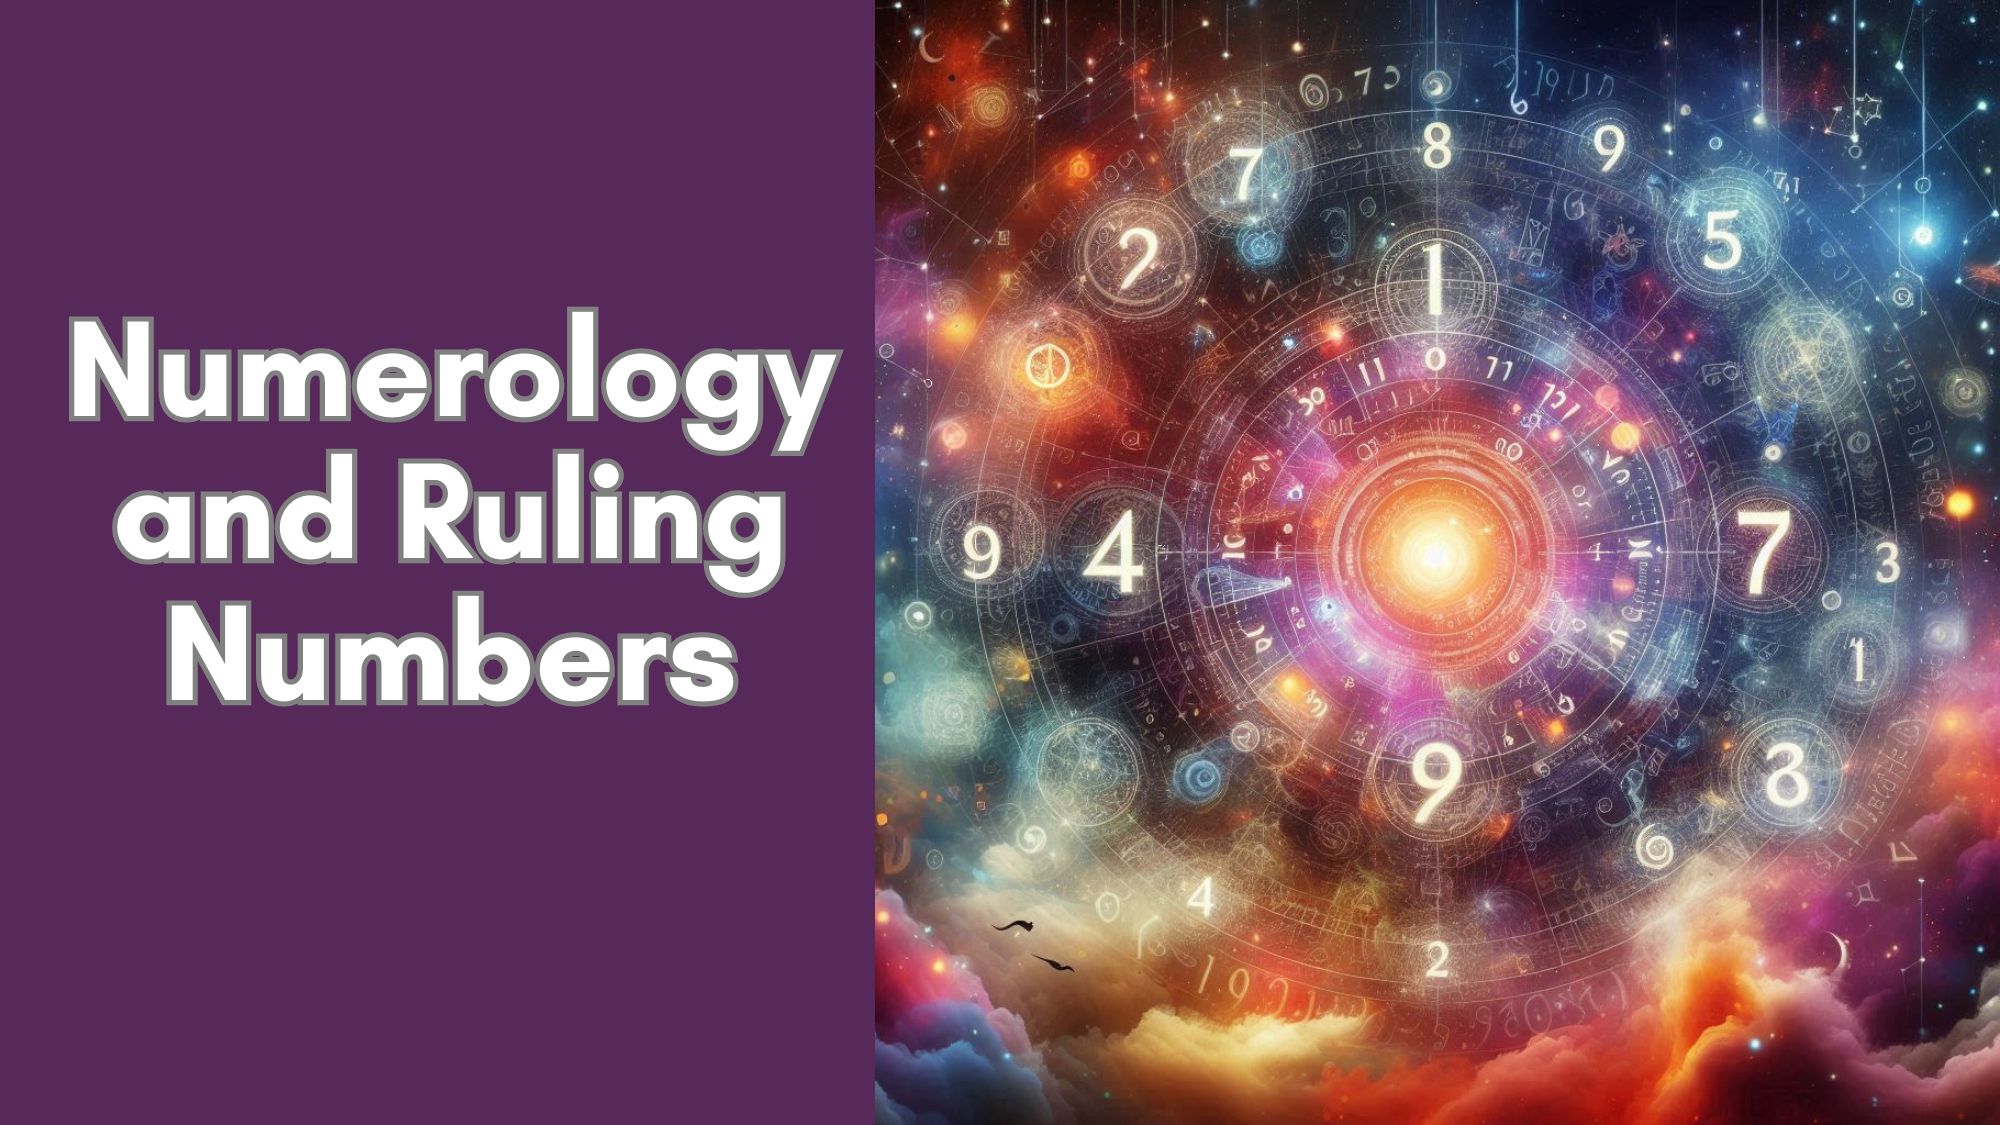 Numerology and ruling numbers